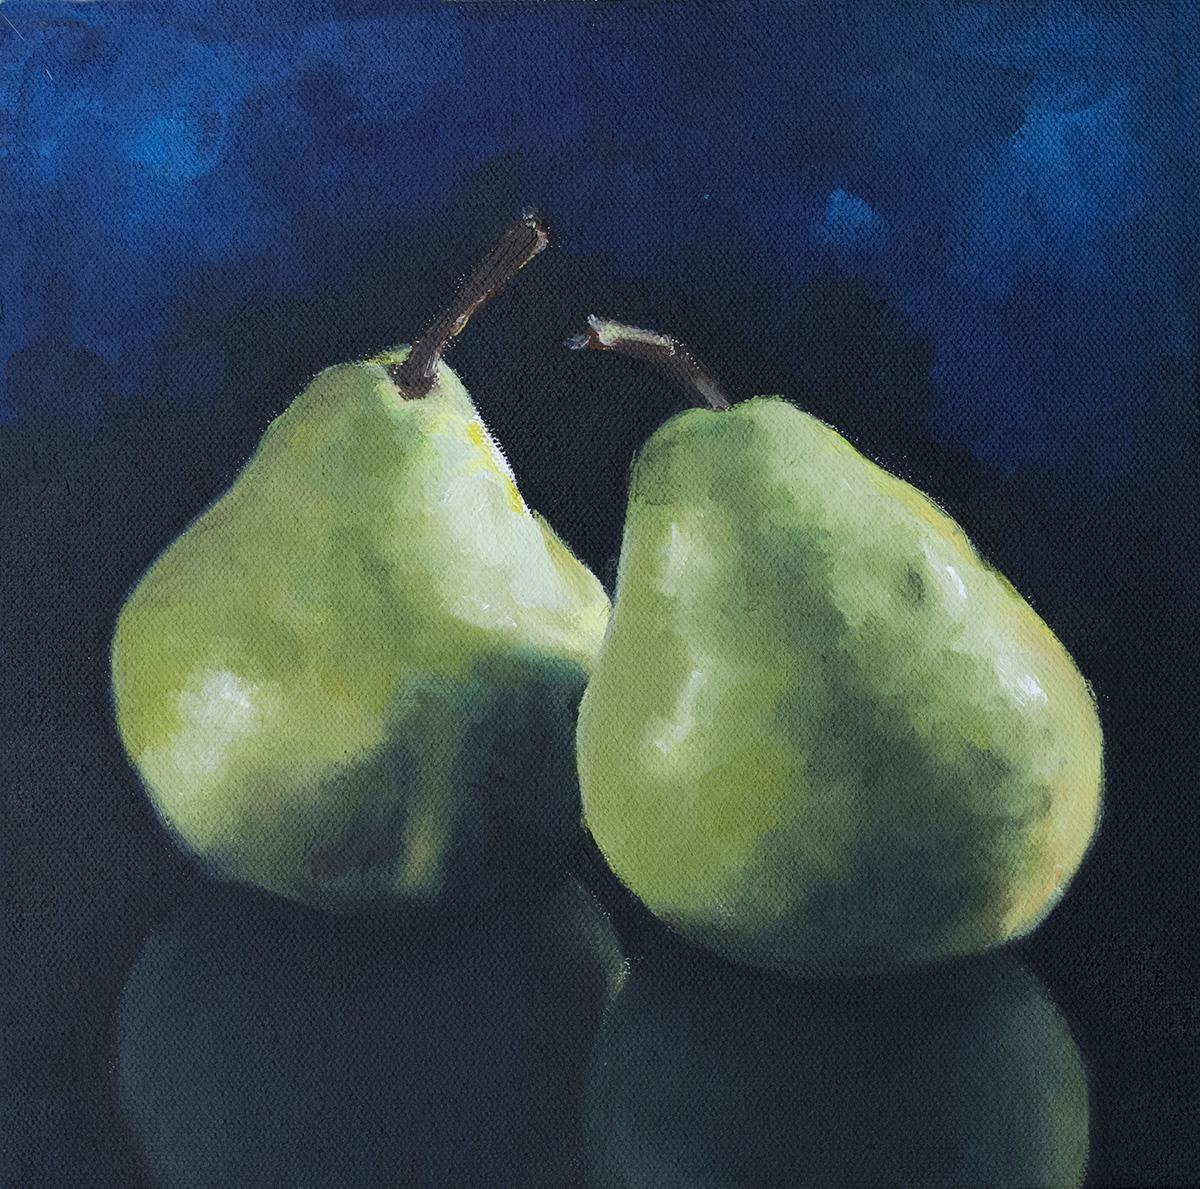 Anthony Enyedy Still-Life Painting - Small Oil Still Life Painting, "Just a Couple of Pairs" 